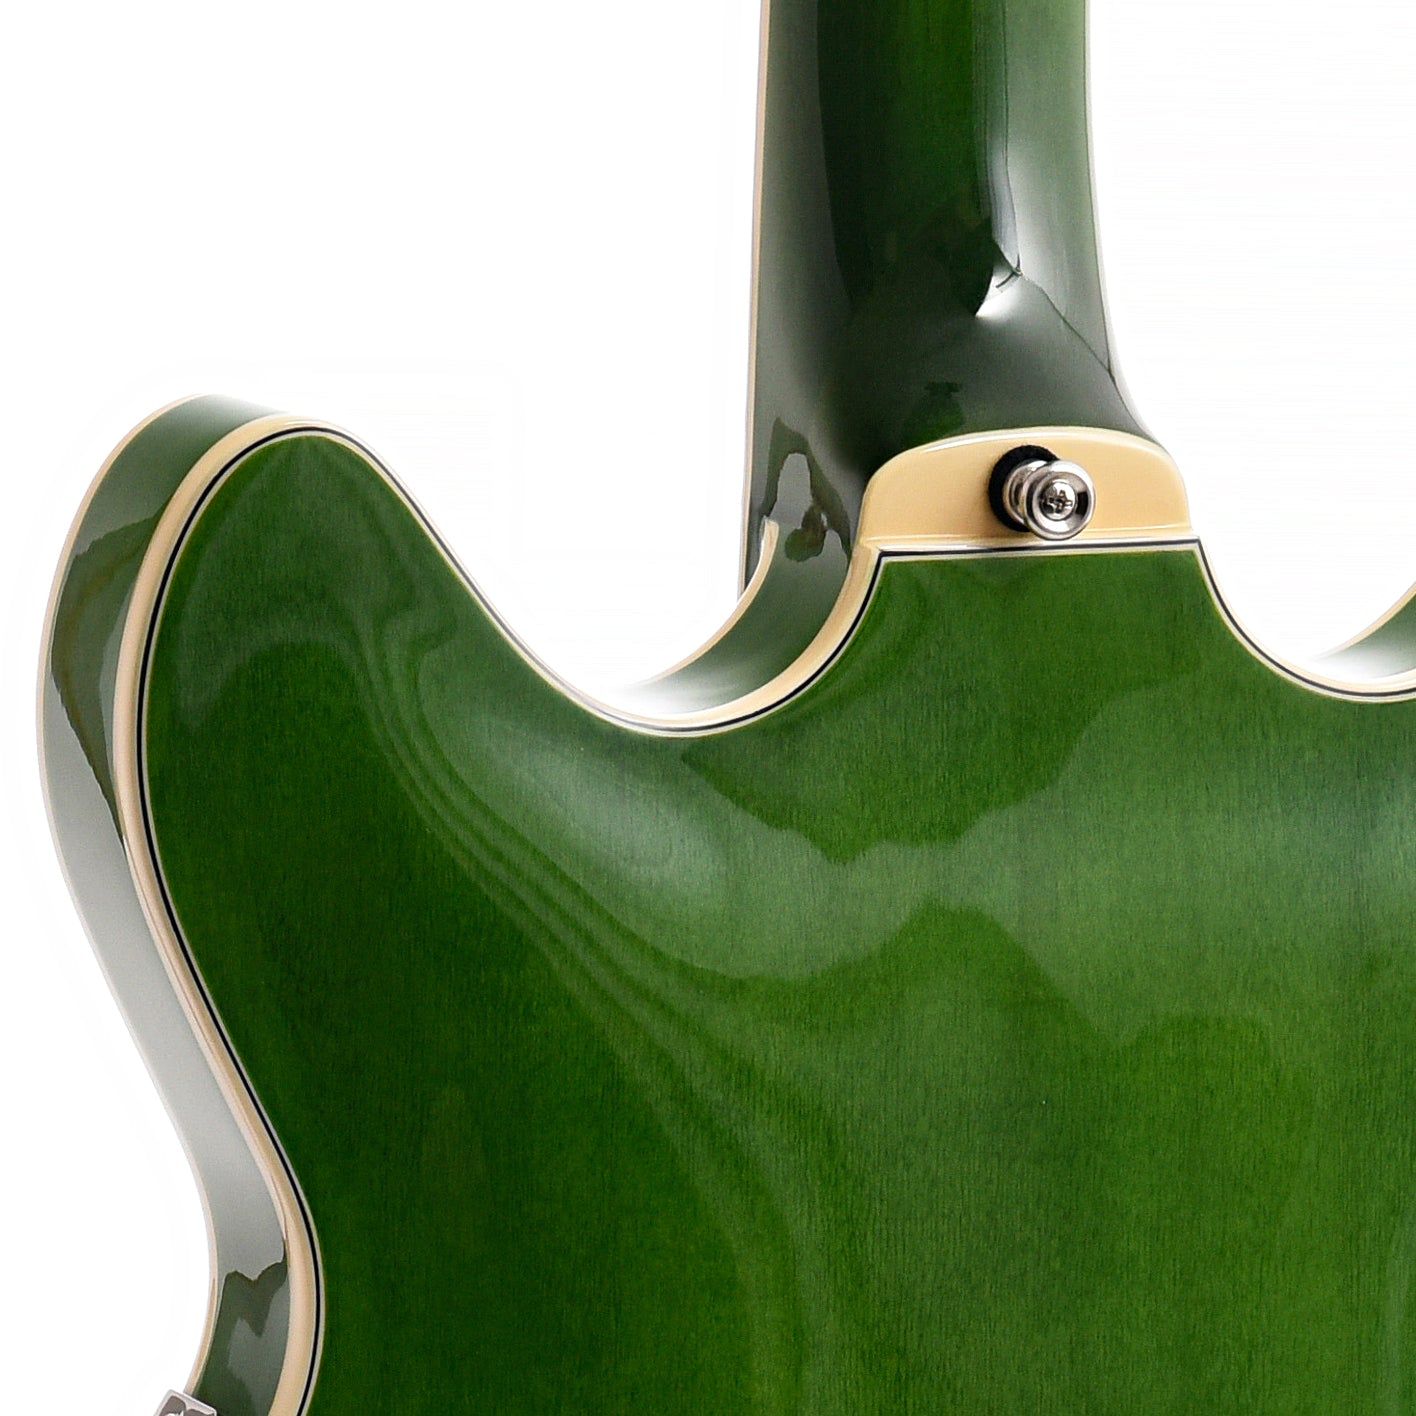 Image 8 of Guild Starfire I Double Cutaway Semi-Hollow Body Guitar with Vibrato, Emerald Green - SKU# GSF1DCV-GRN : Product Type Hollow Body Electric Guitars : Elderly Instruments